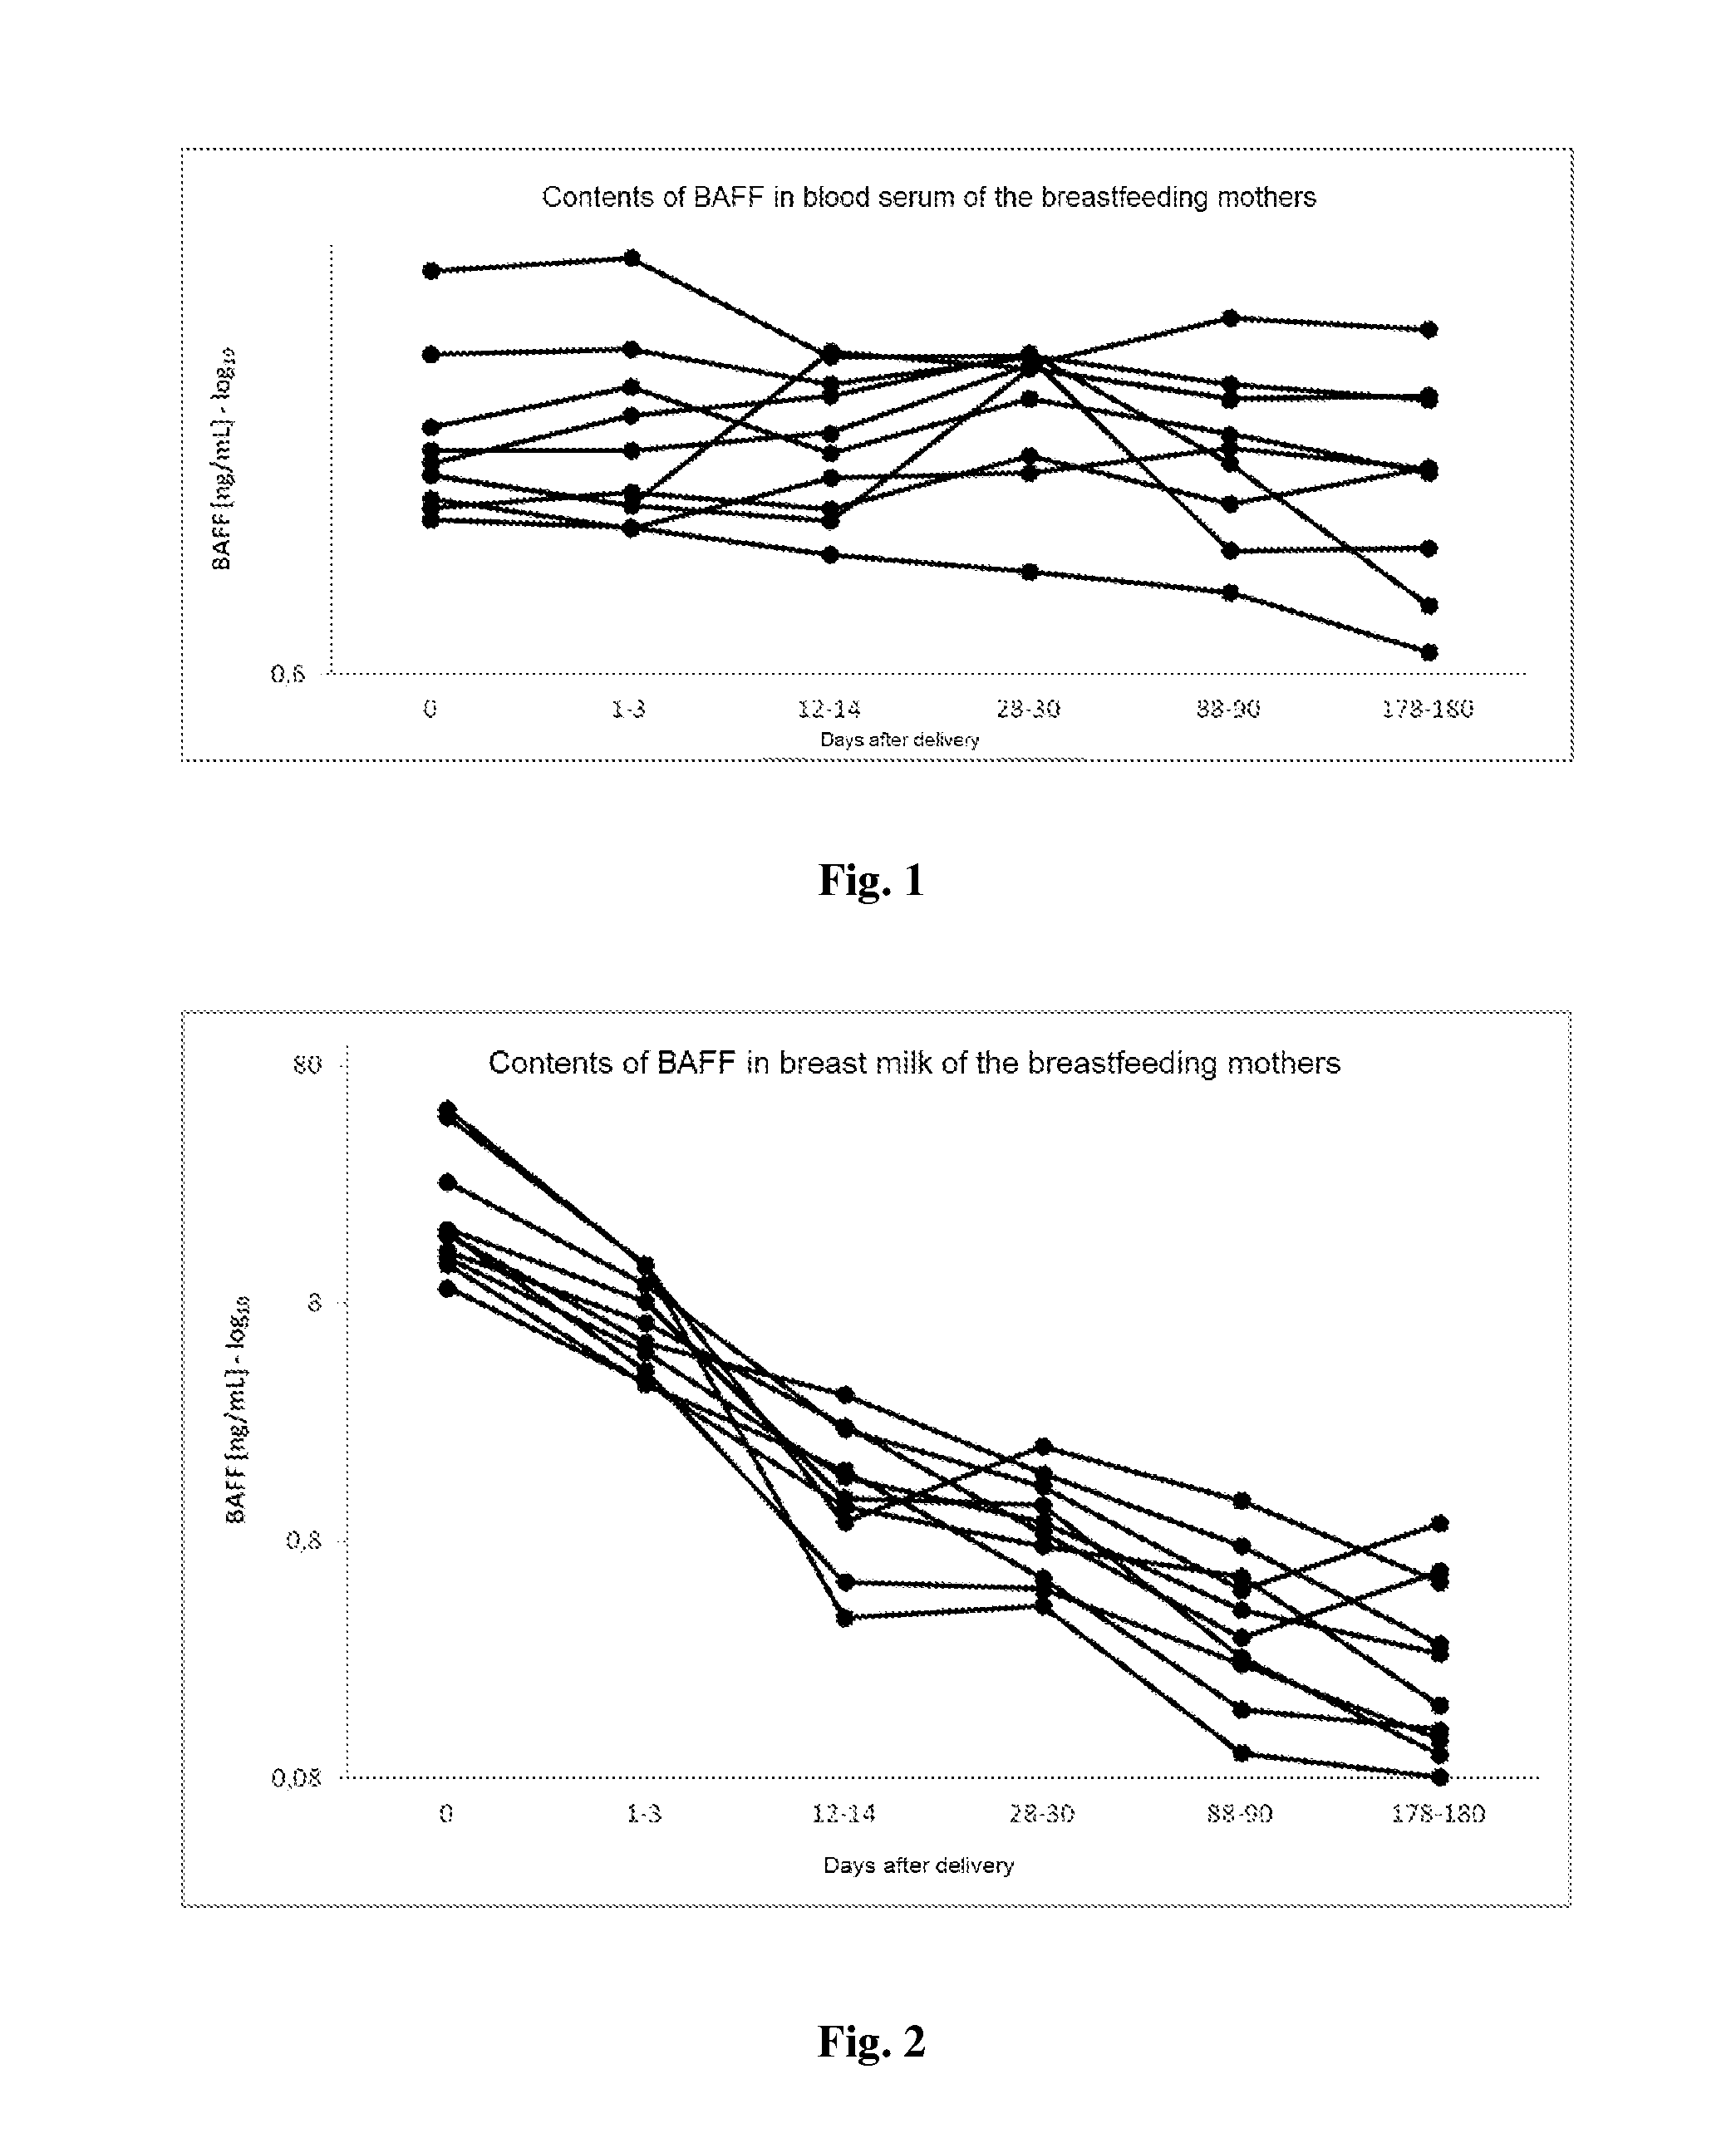 B-cell activating factor for increasing mucosal immunity of infants as well as sucklings and a preparation containing this factor